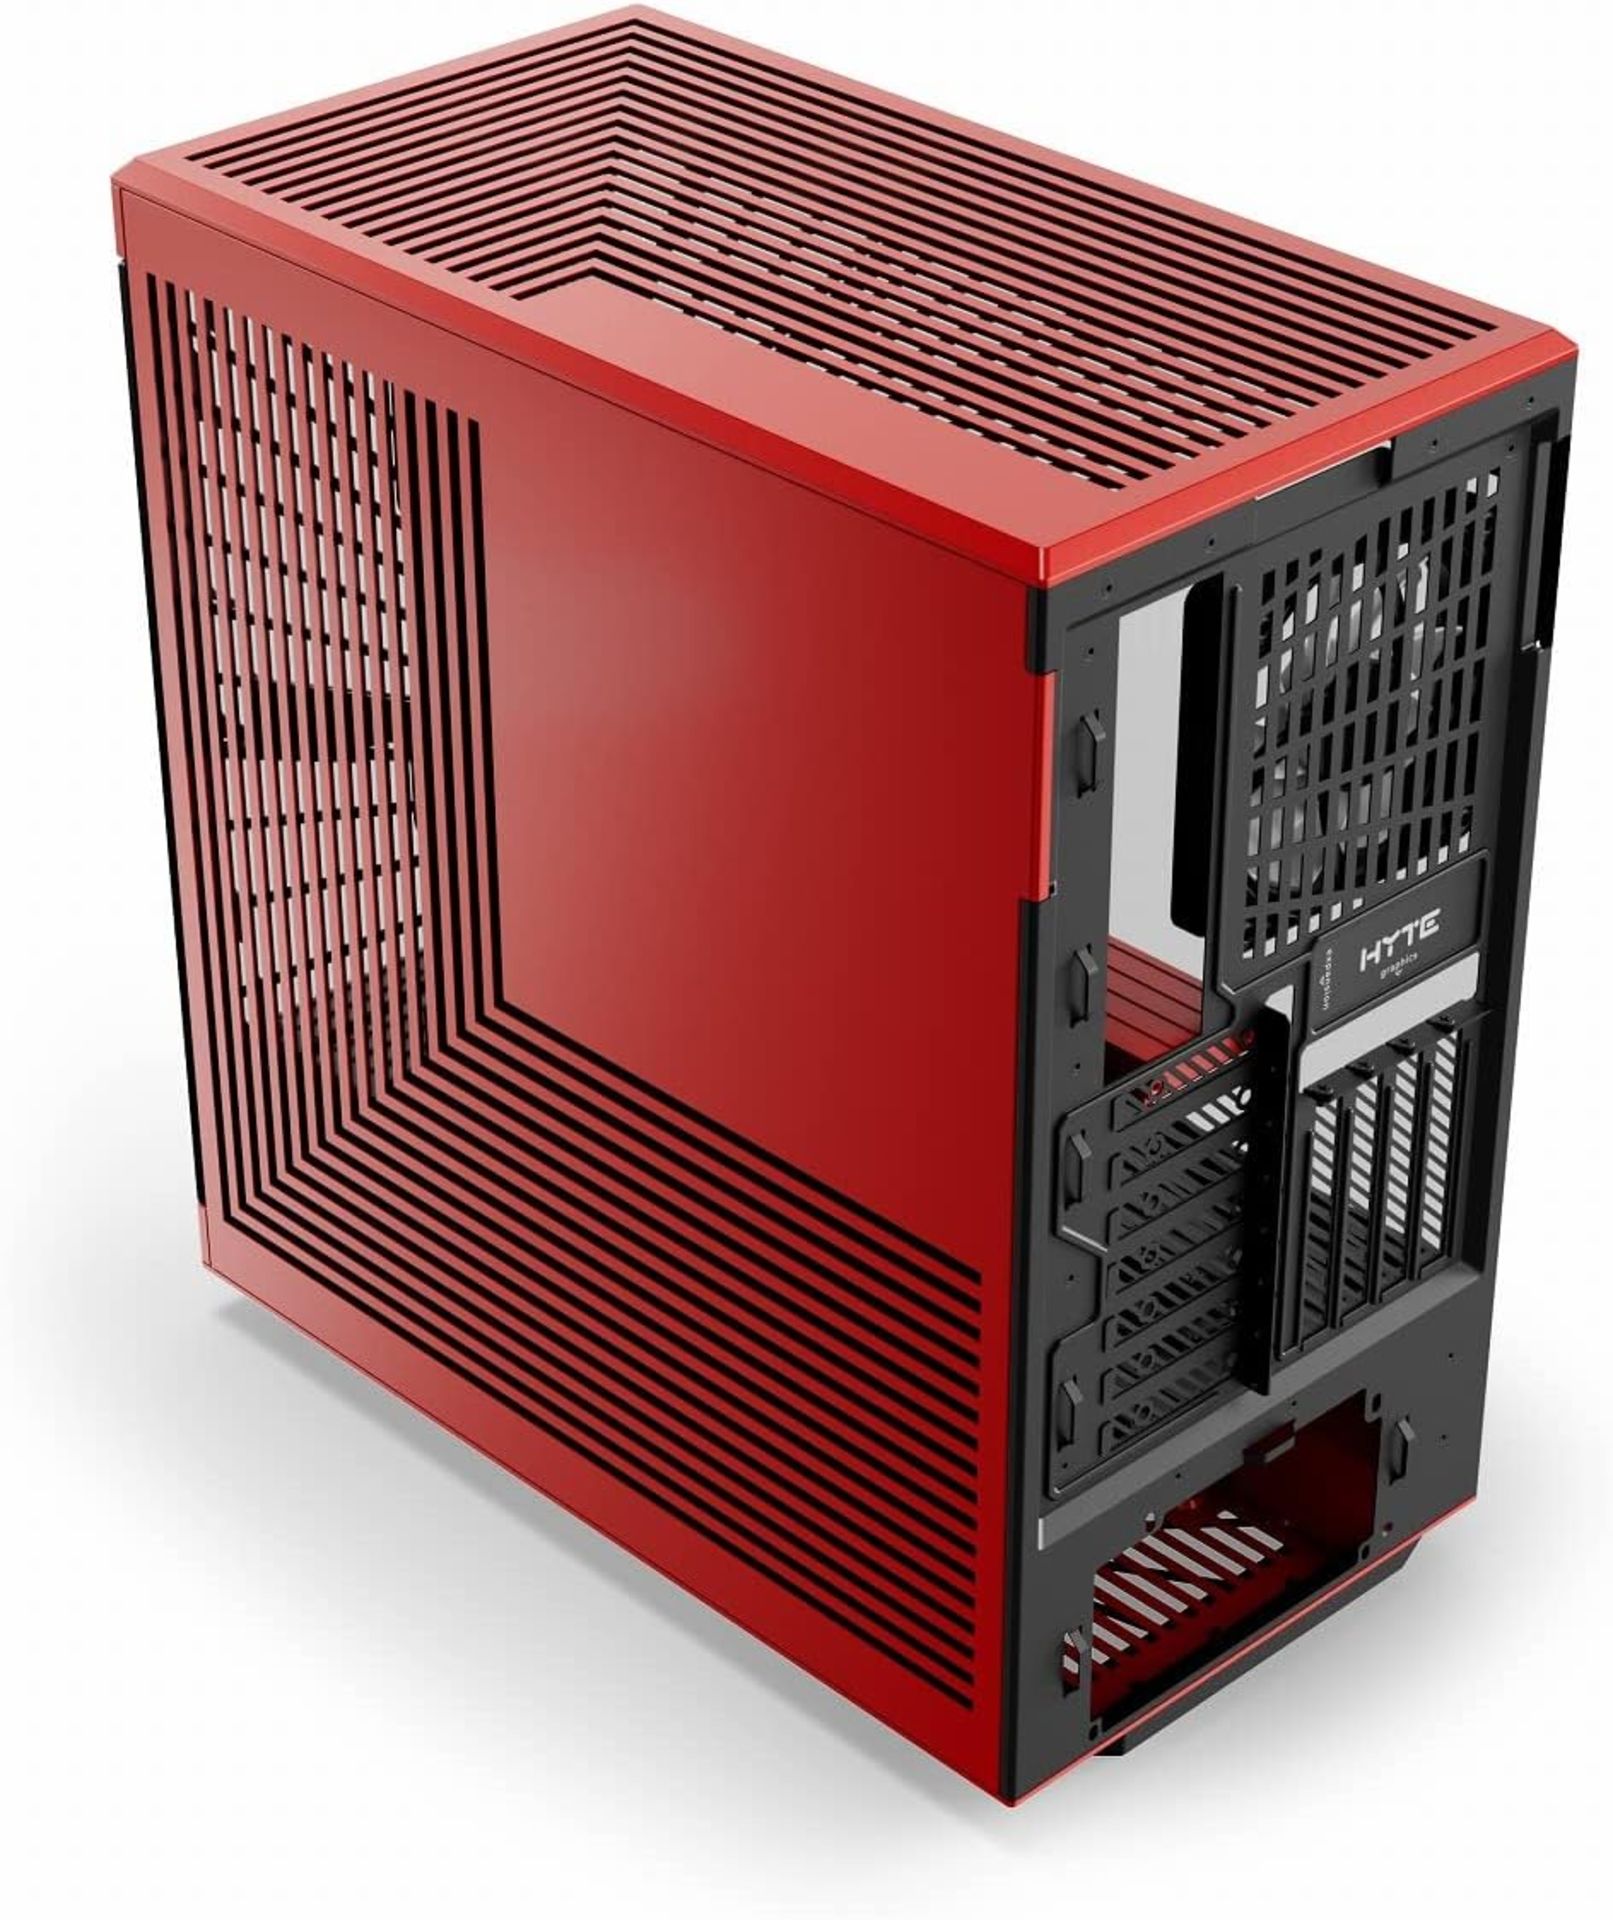 NEW & BOXED HYTE Y40 Mid-Tower ATX Case - Black & Red. RRP £164.99. (R6-7). The HYTE Y40 Mid-Tower - Image 3 of 5